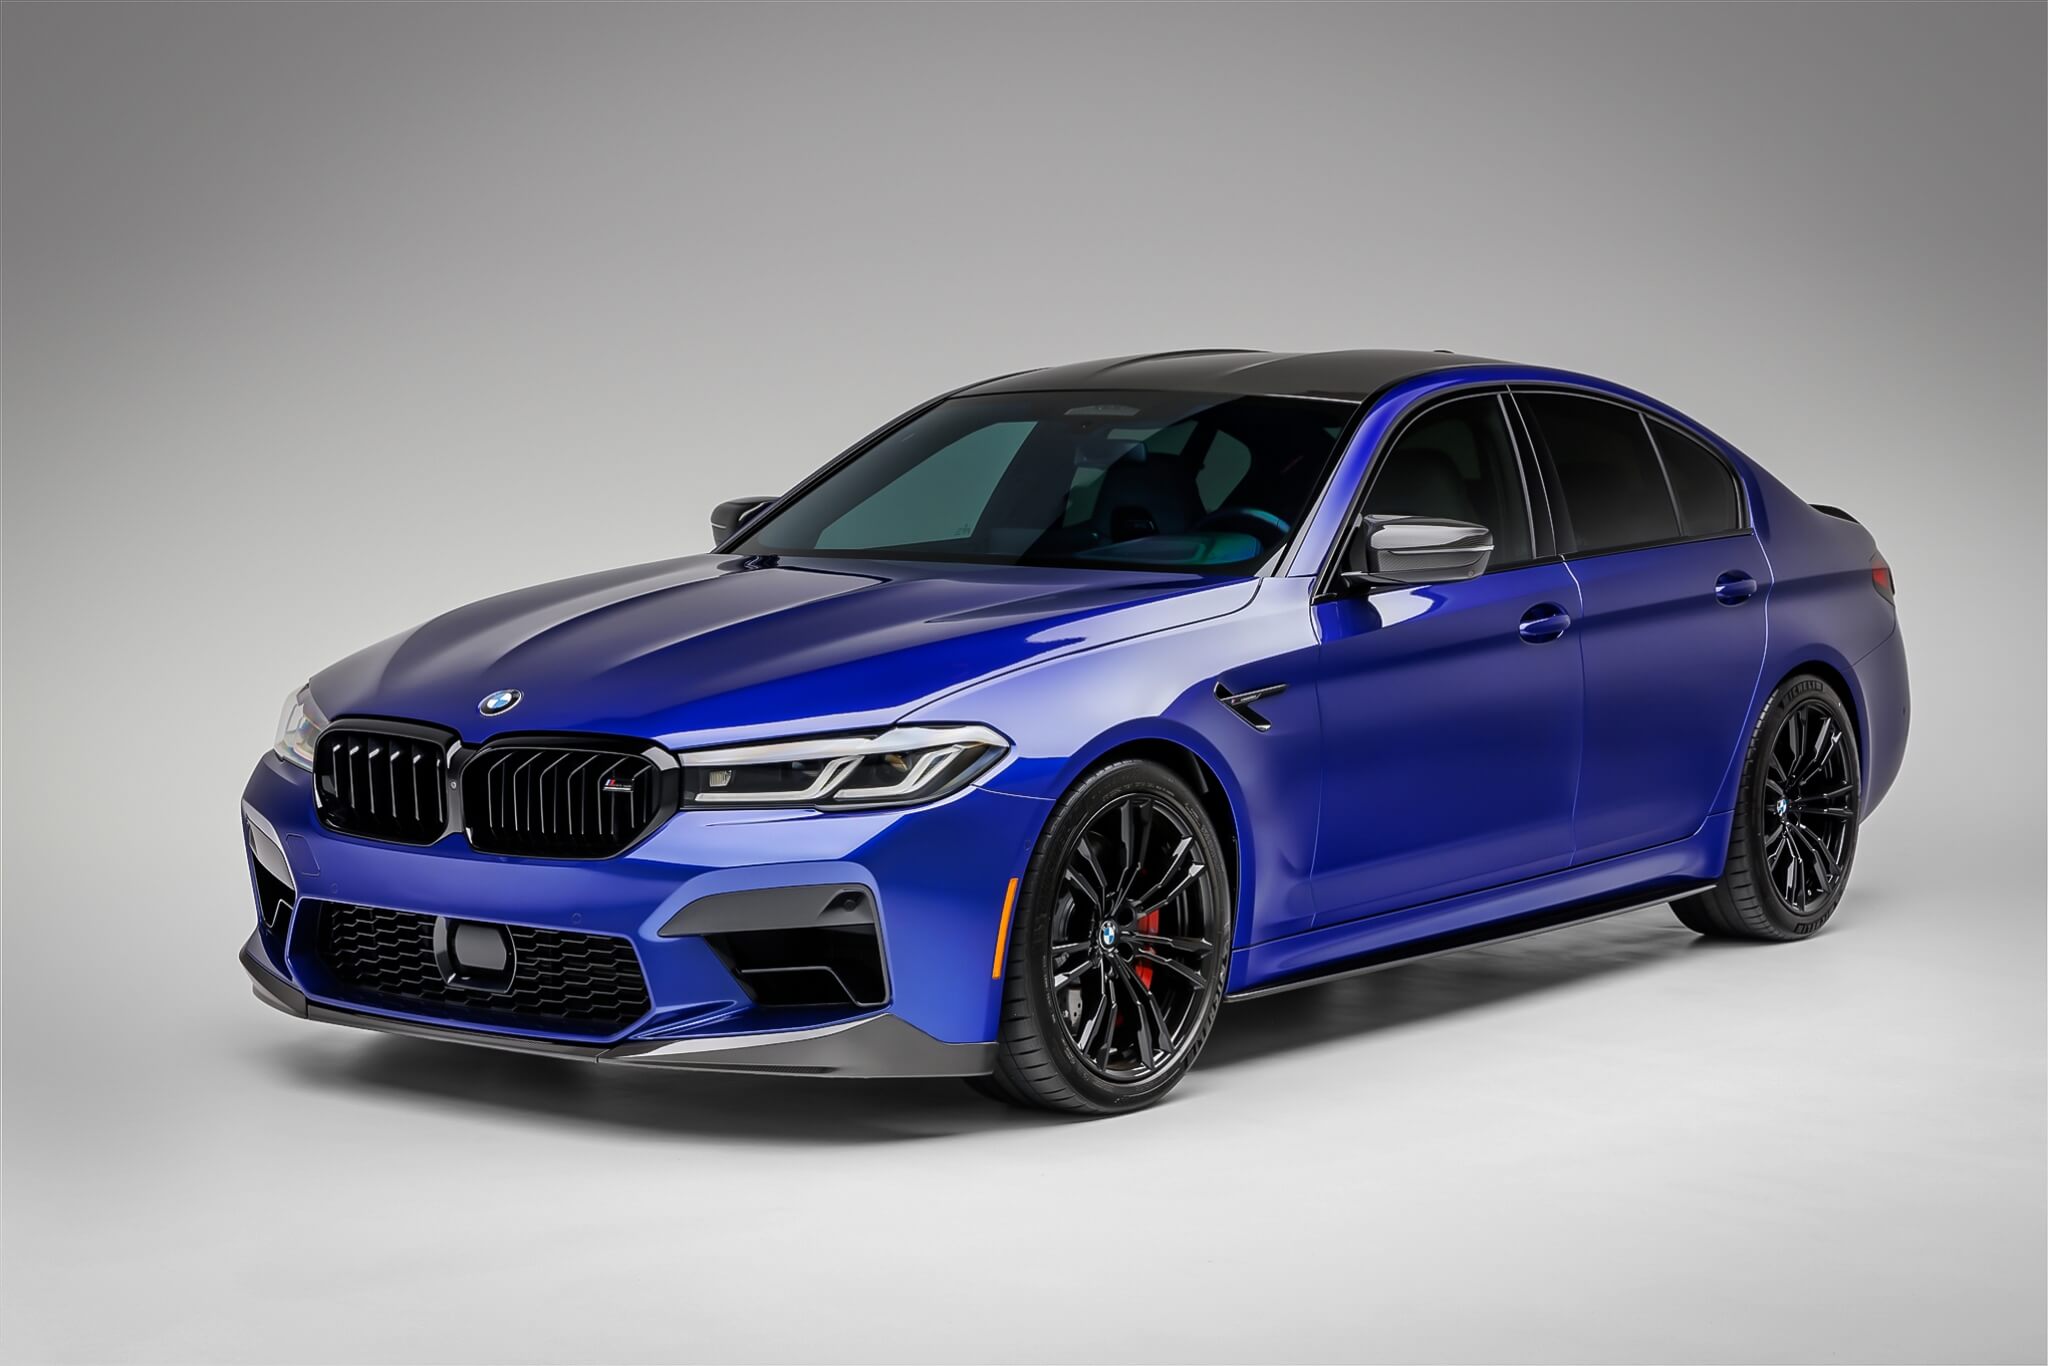 Бмв м5 competition. BMW m5 f90 Competition. BMW m5 Competition 2021. BMW m5 f90 2020. BMW m5 f90 Competition Blue.